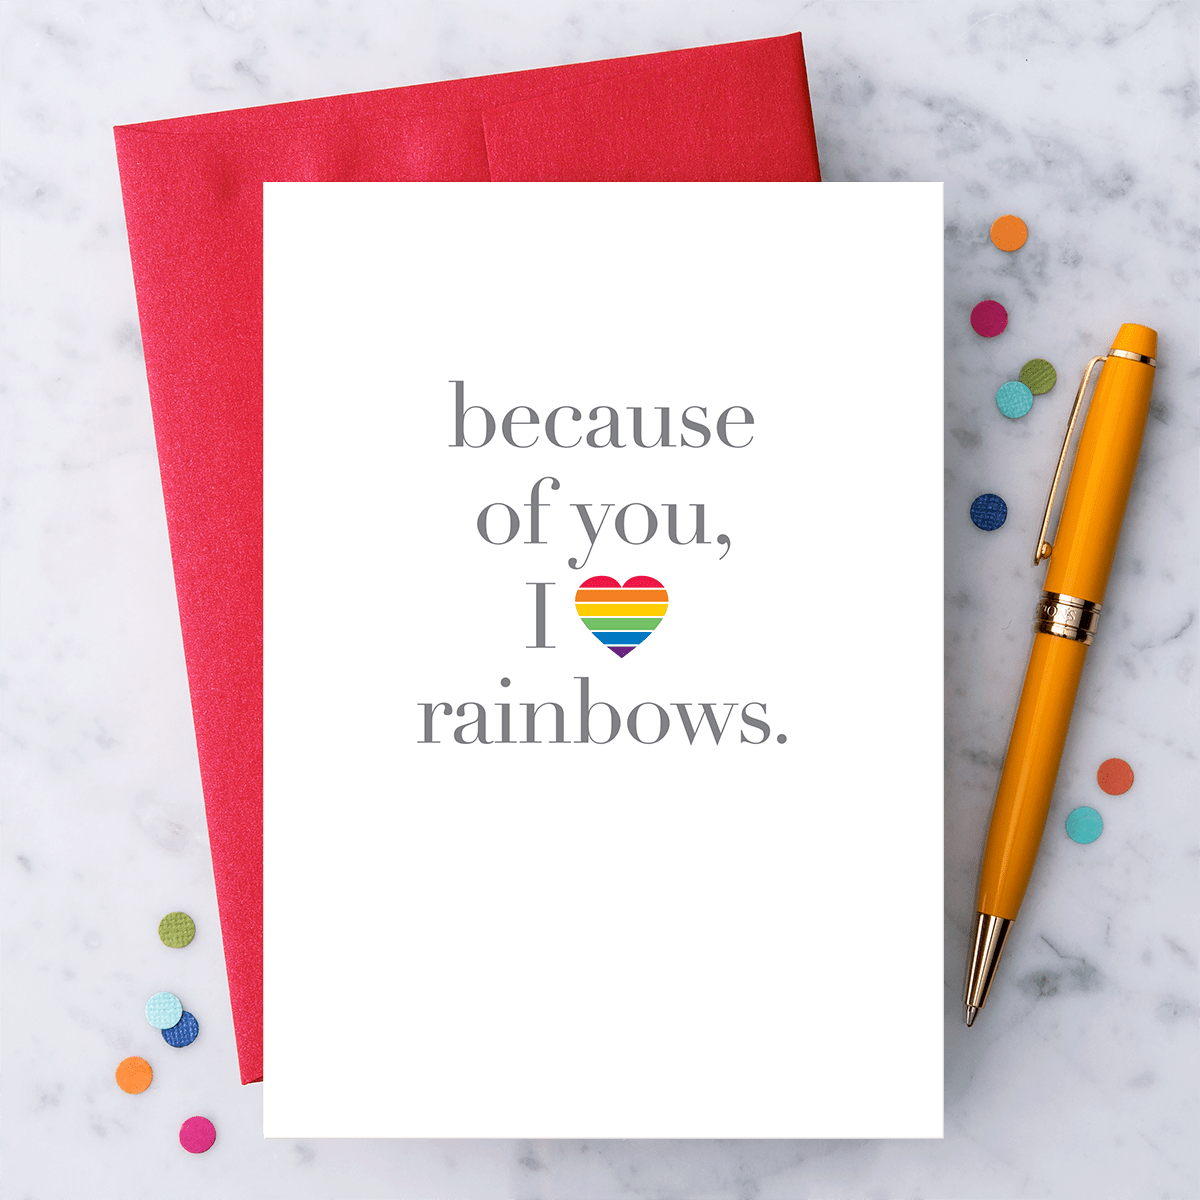 "Because of you, I love rainbows."